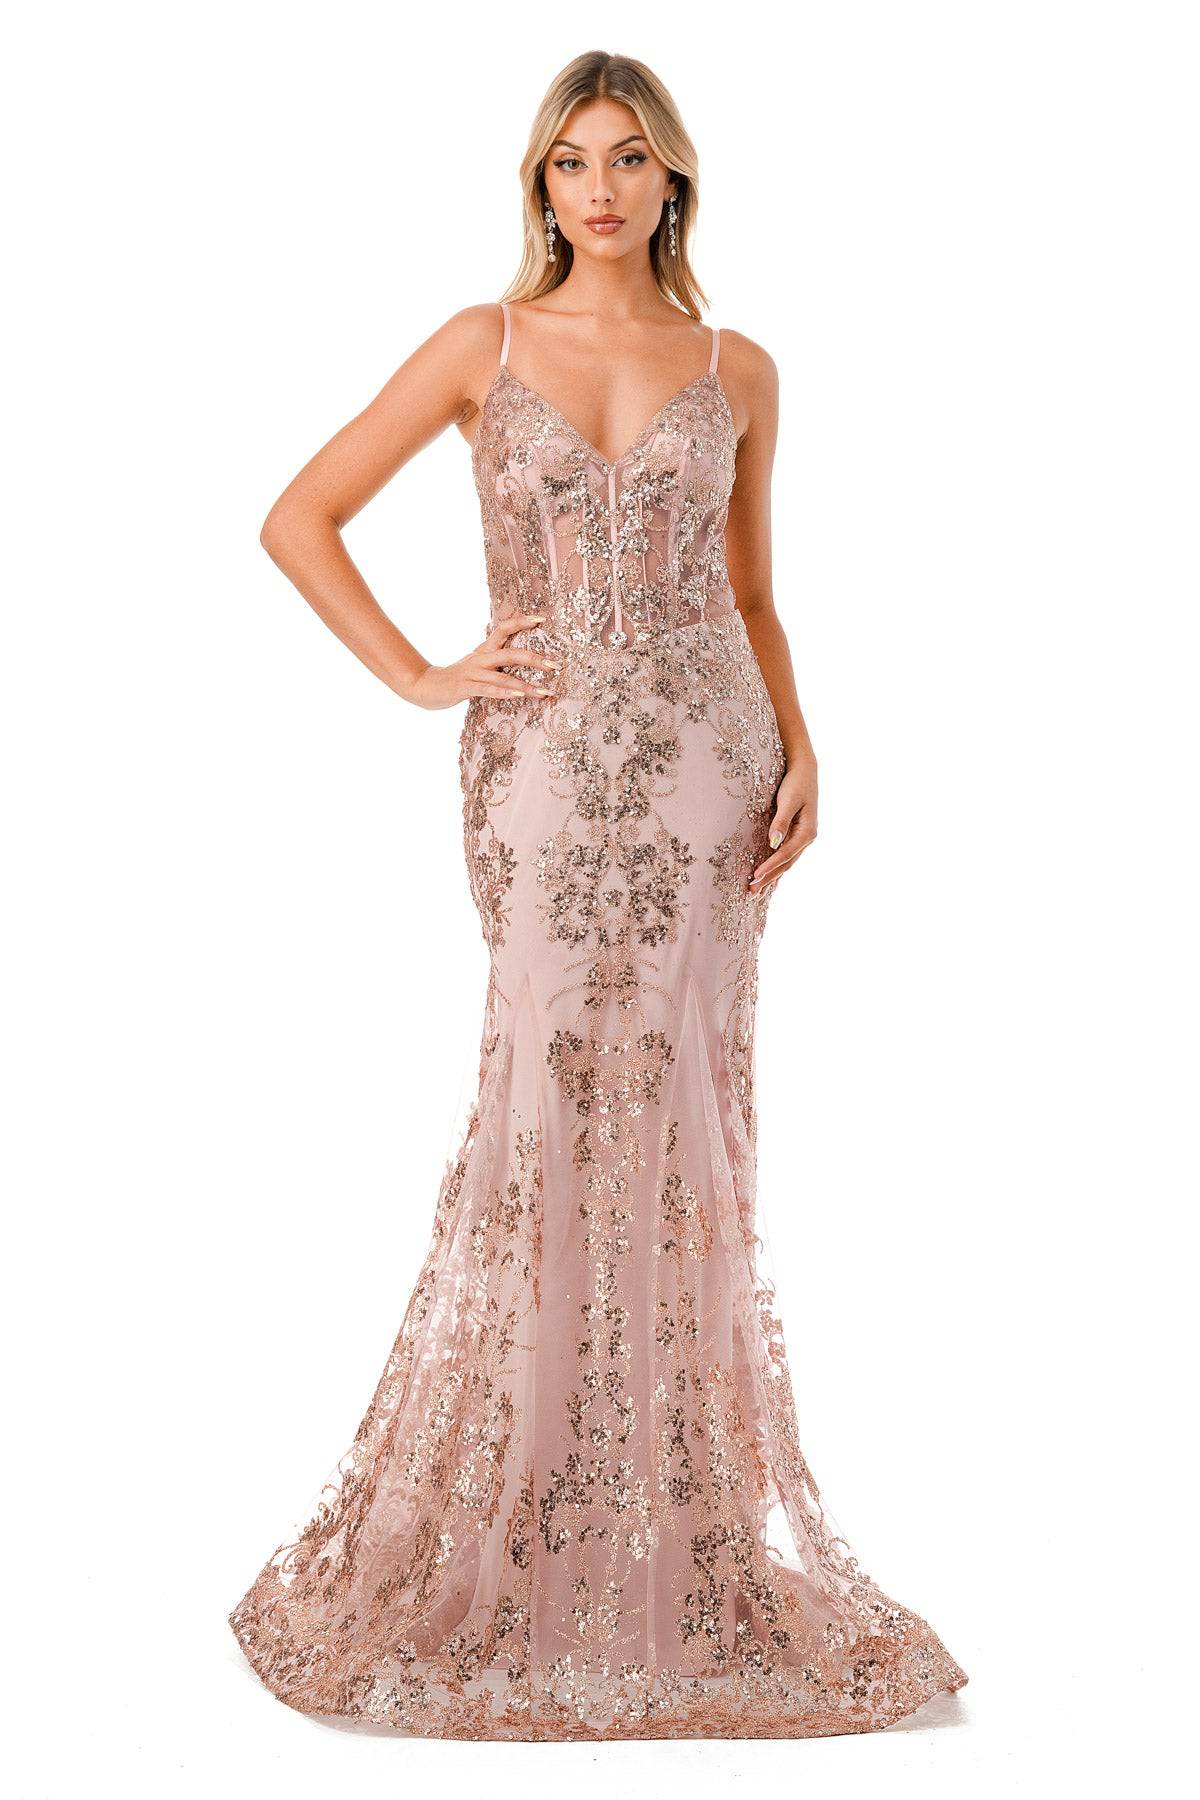 Aspeed Design L2820W Sparkling Sequin Corset Dress - NORMA REED